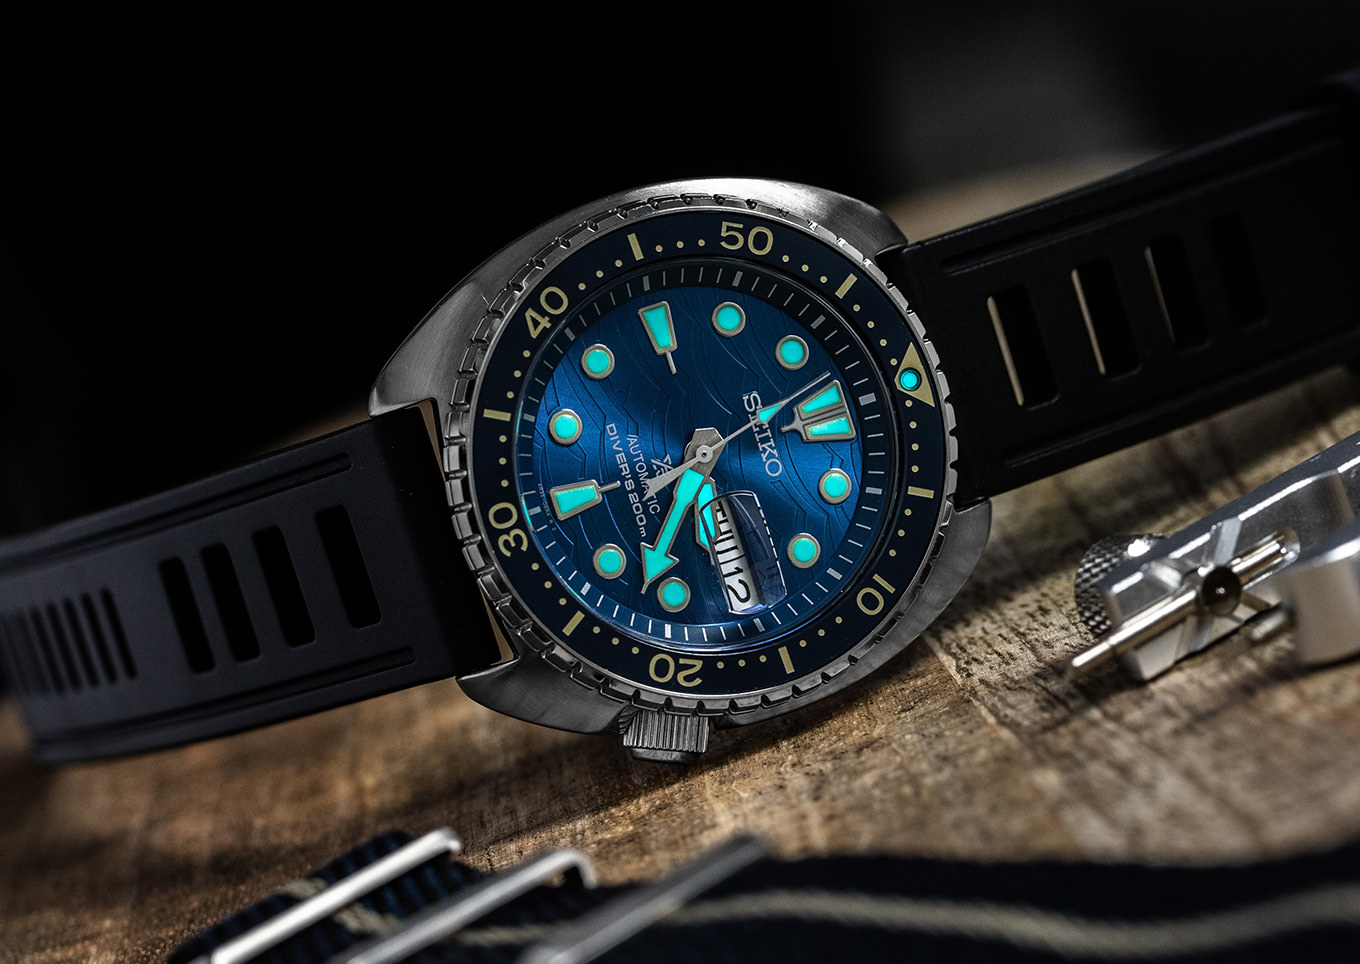 Seiko-diver-watch-with-a-rubber-strap